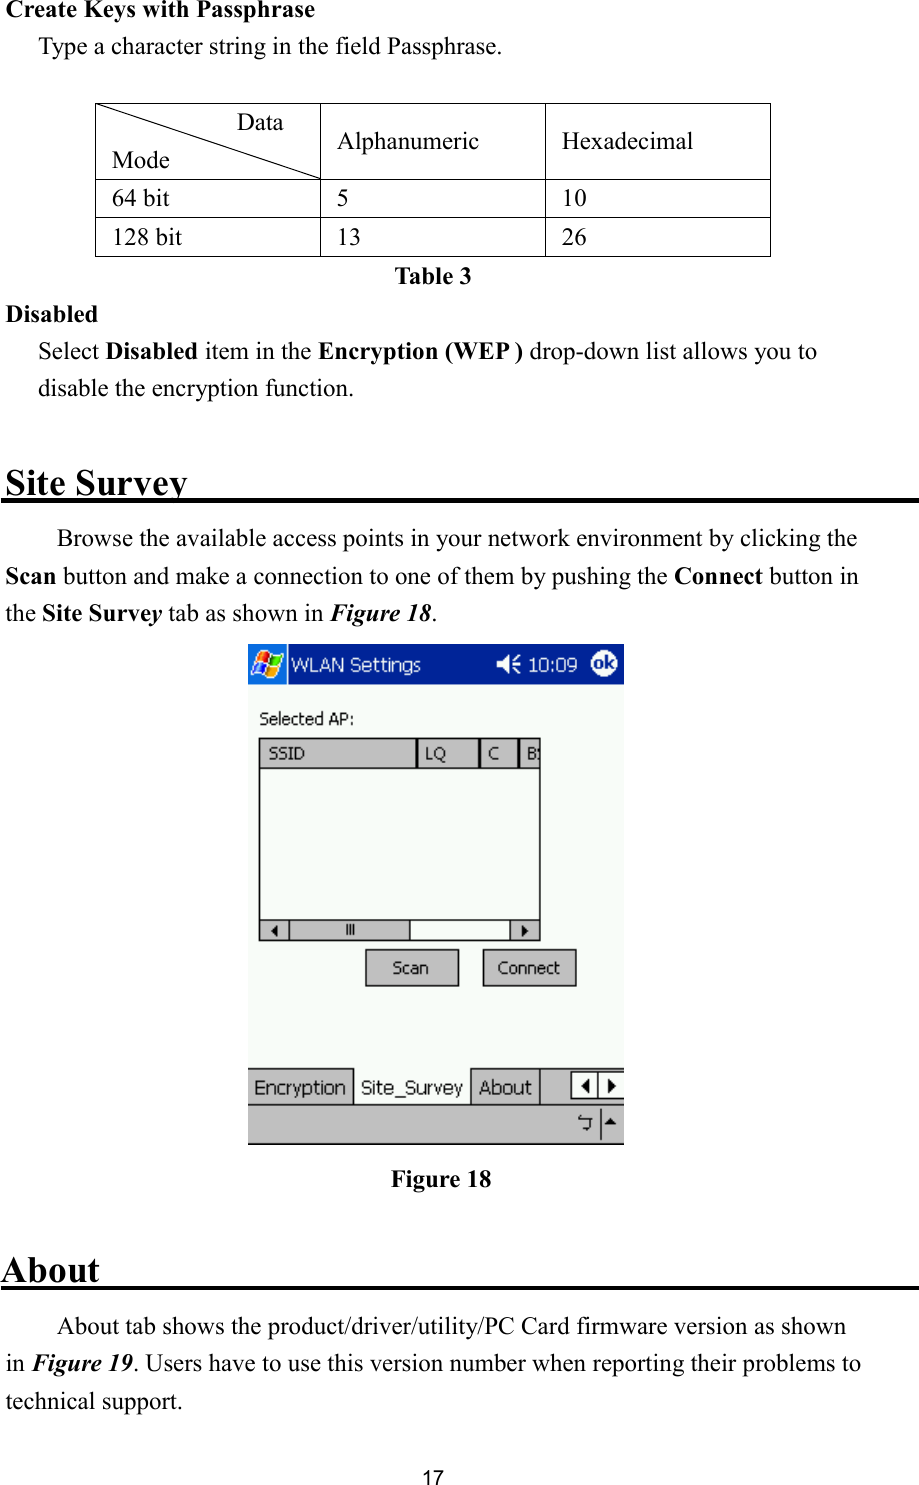  17Create Keys with Passphrase Type a character string in the field Passphrase.  Data   Mode  Alphanumeric Hexadecimal 64 bit  5  10 128 bit  13  26 Table 3 Disabled Select Disabled item in the Encryption (WEP ) drop-down list allows you to disable the encryption function.  Site Survey Browse the available access points in your network environment by clicking the Scan button and make a connection to one of them by pushing the Connect button in the Site Survey tab as shown in Figure 18.   About About tab shows the product/driver/utility/PC Card firmware version as shown in Figure 19. Users have to use this version number when reporting their problems to technical support. Figure 18 